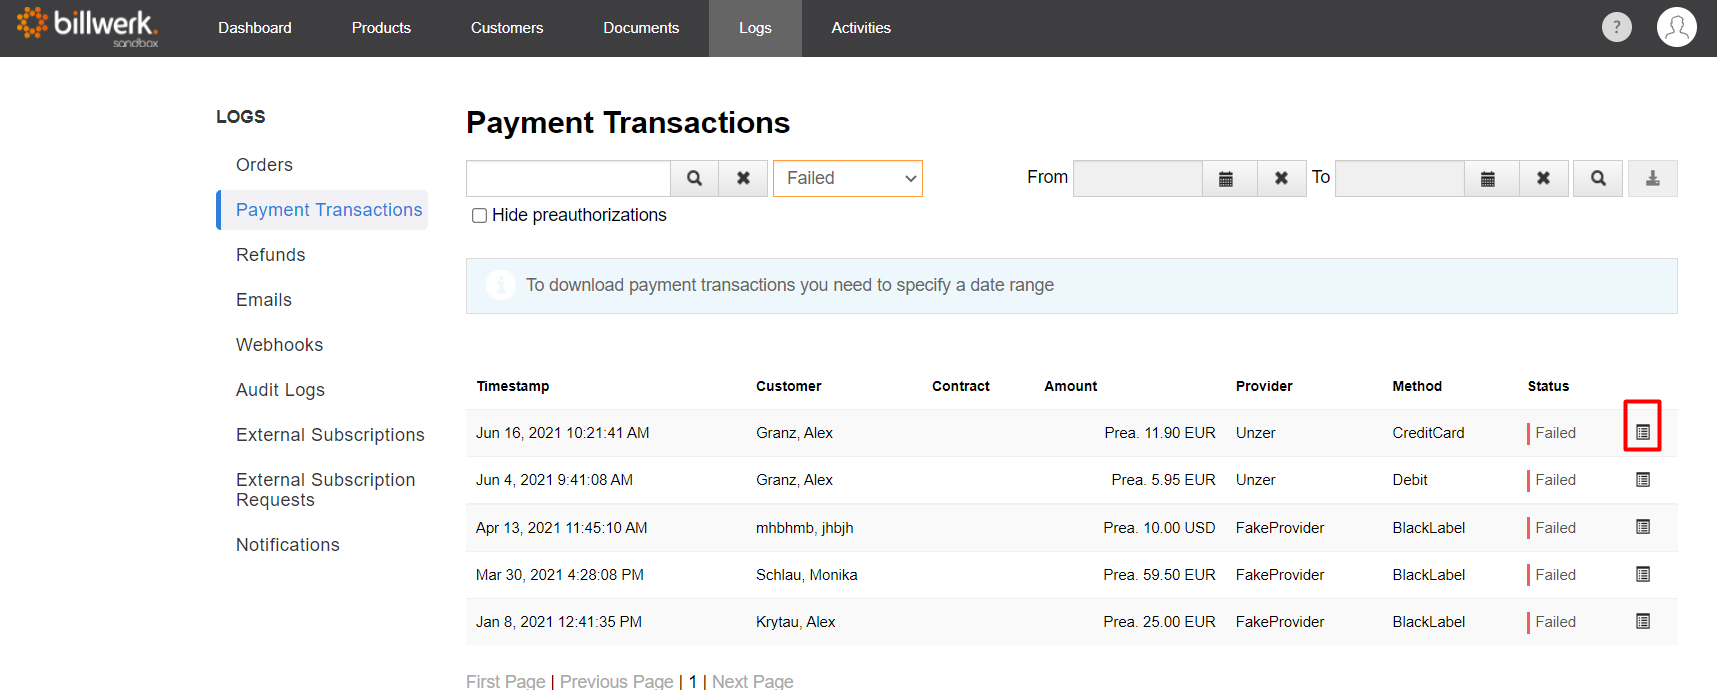 Payment Transactions